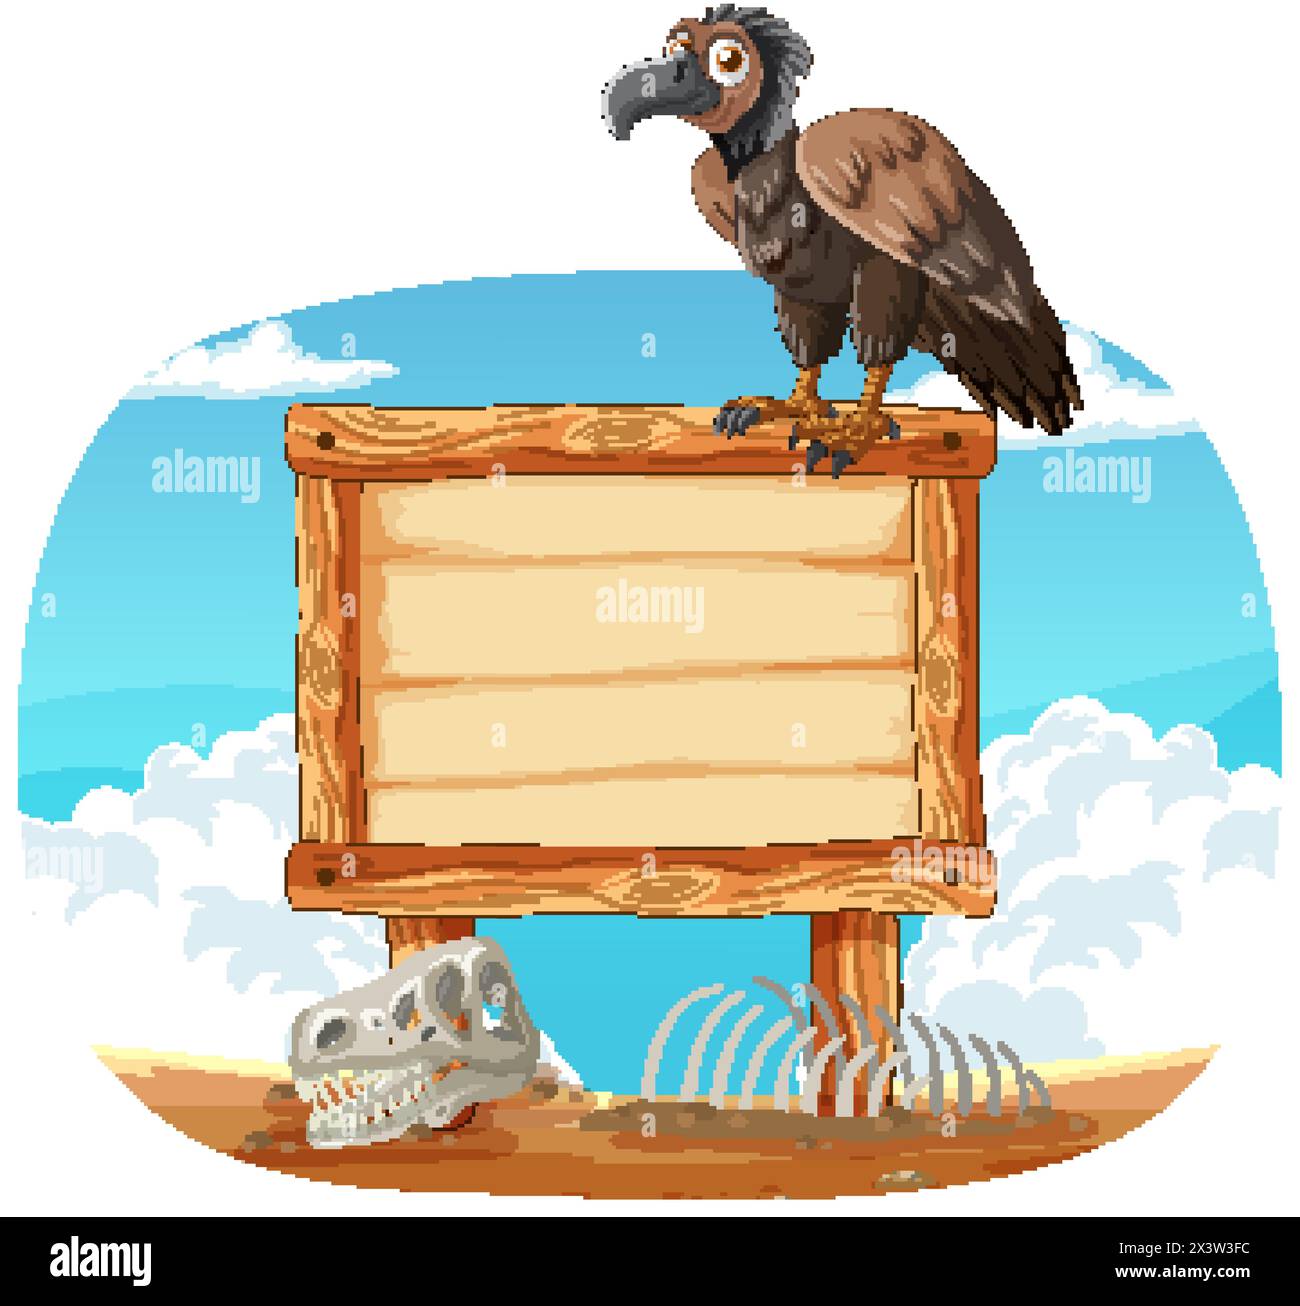 Vulture perched on sign with desert background. Stock Vector